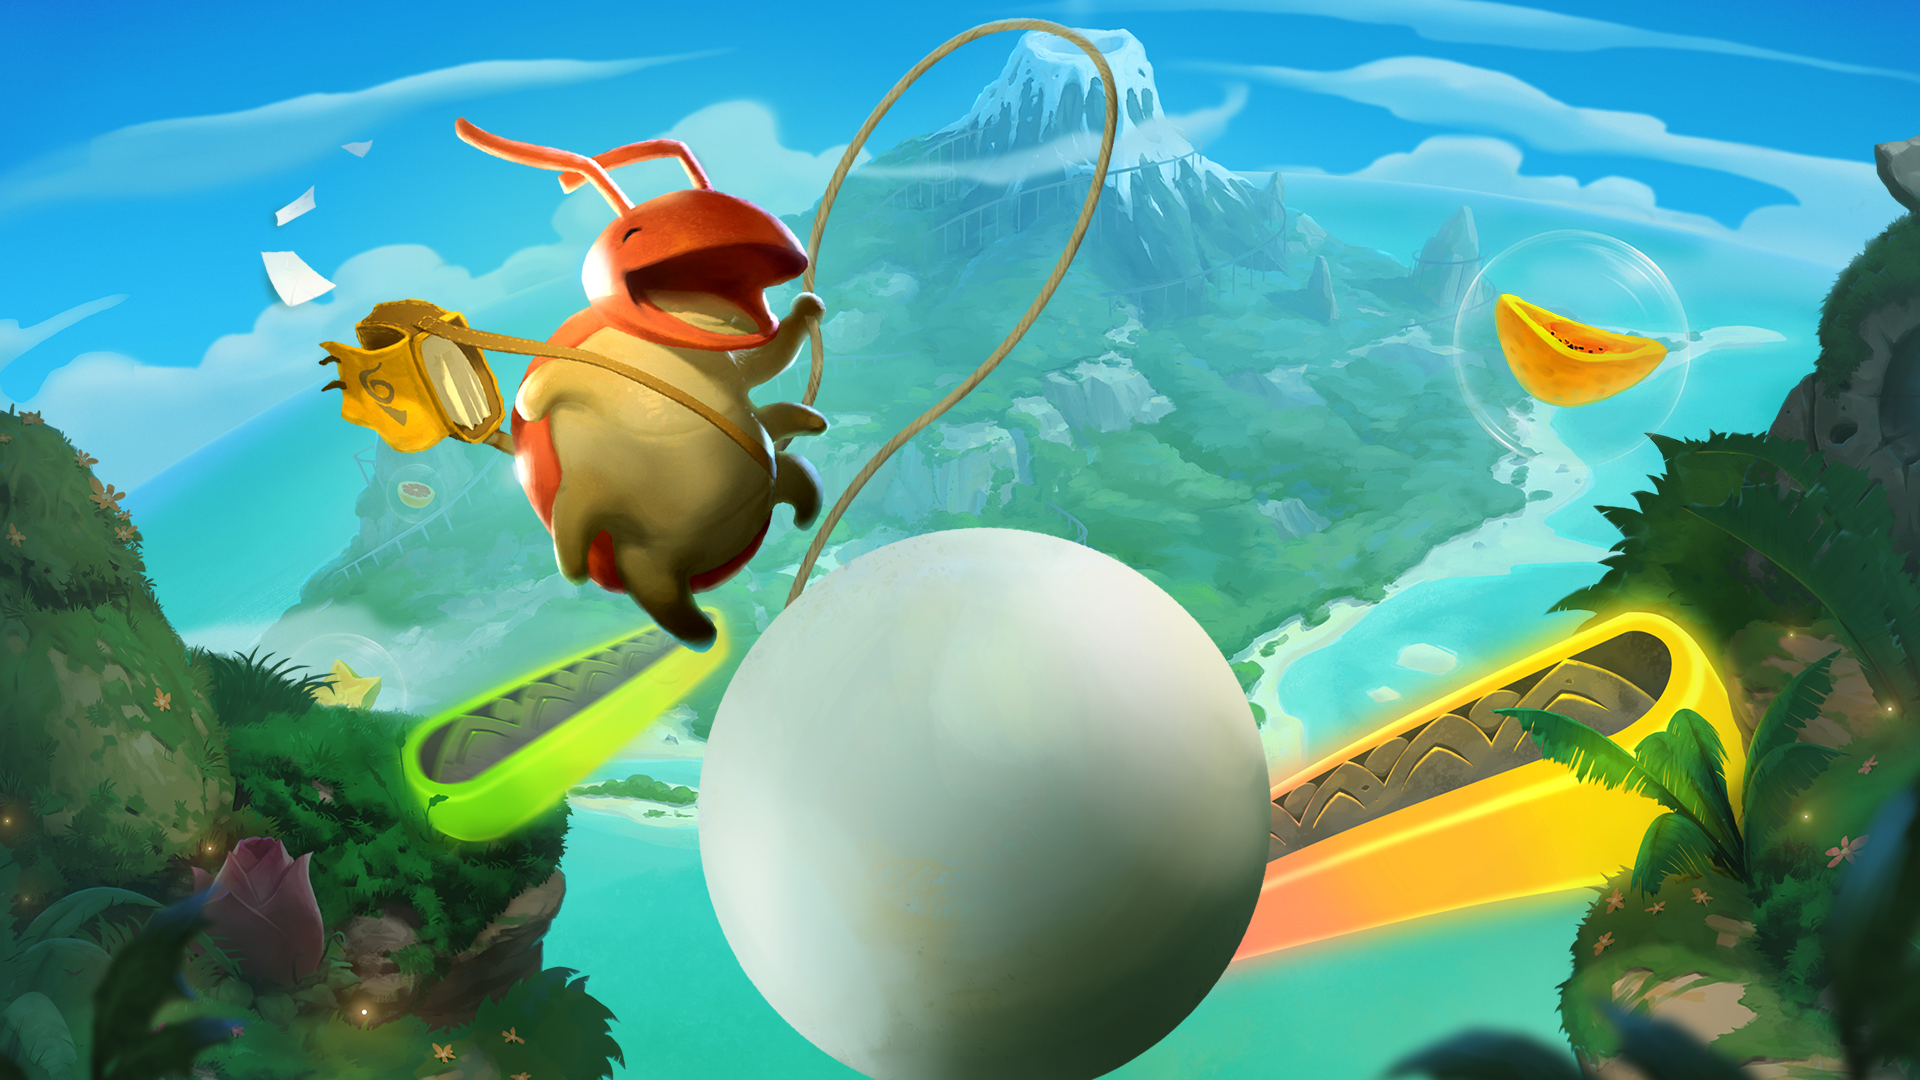 Xbox Live Gold in May: Yoku's Island Express, The Inner World and Beyond